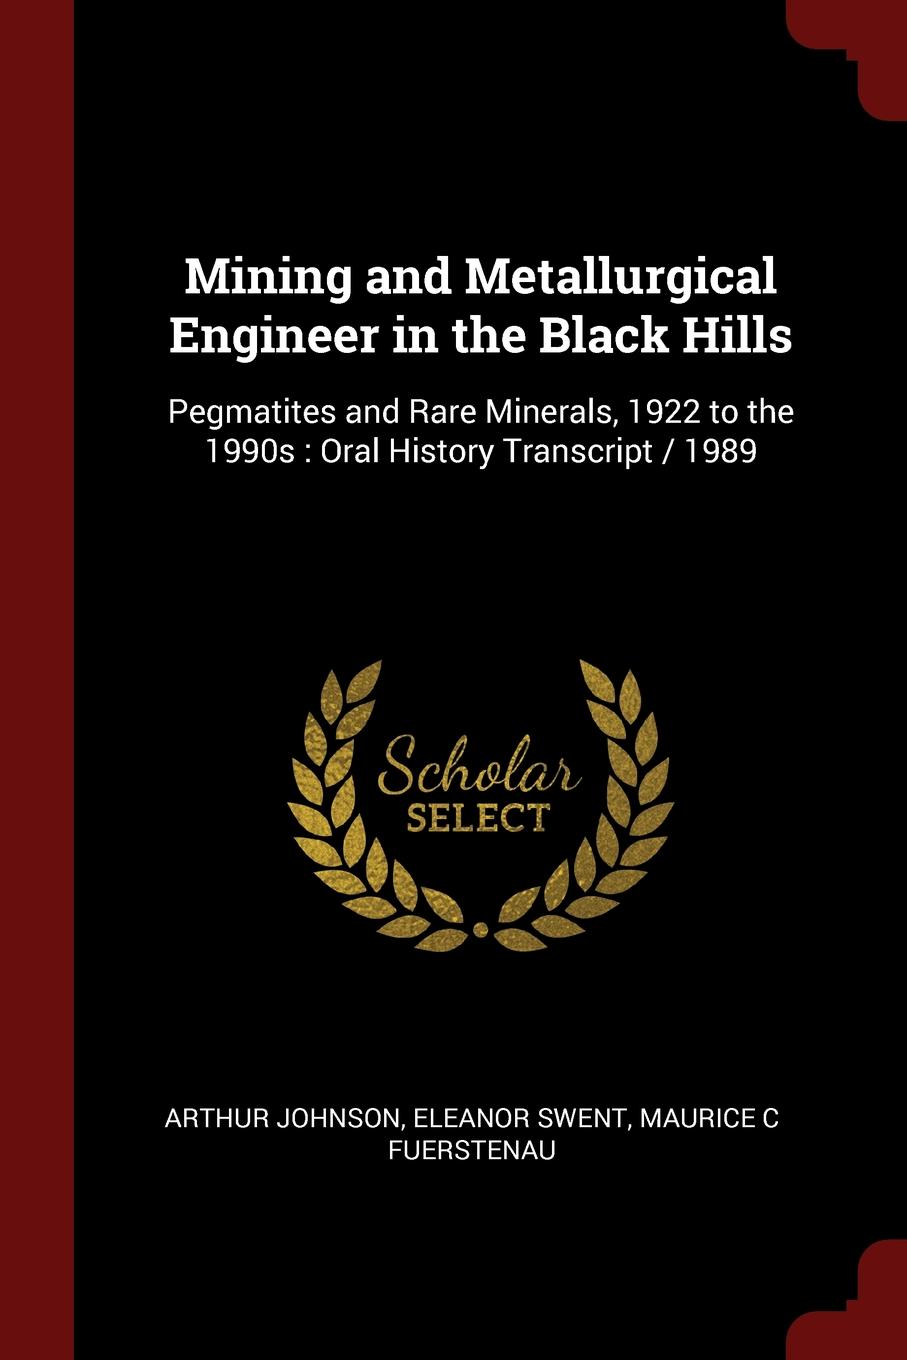 Mining and Metallurgical Engineer in the Black Hills. Pegmatites and Rare Minerals, 1922 to the 1990s : Oral History Transcript / 1989